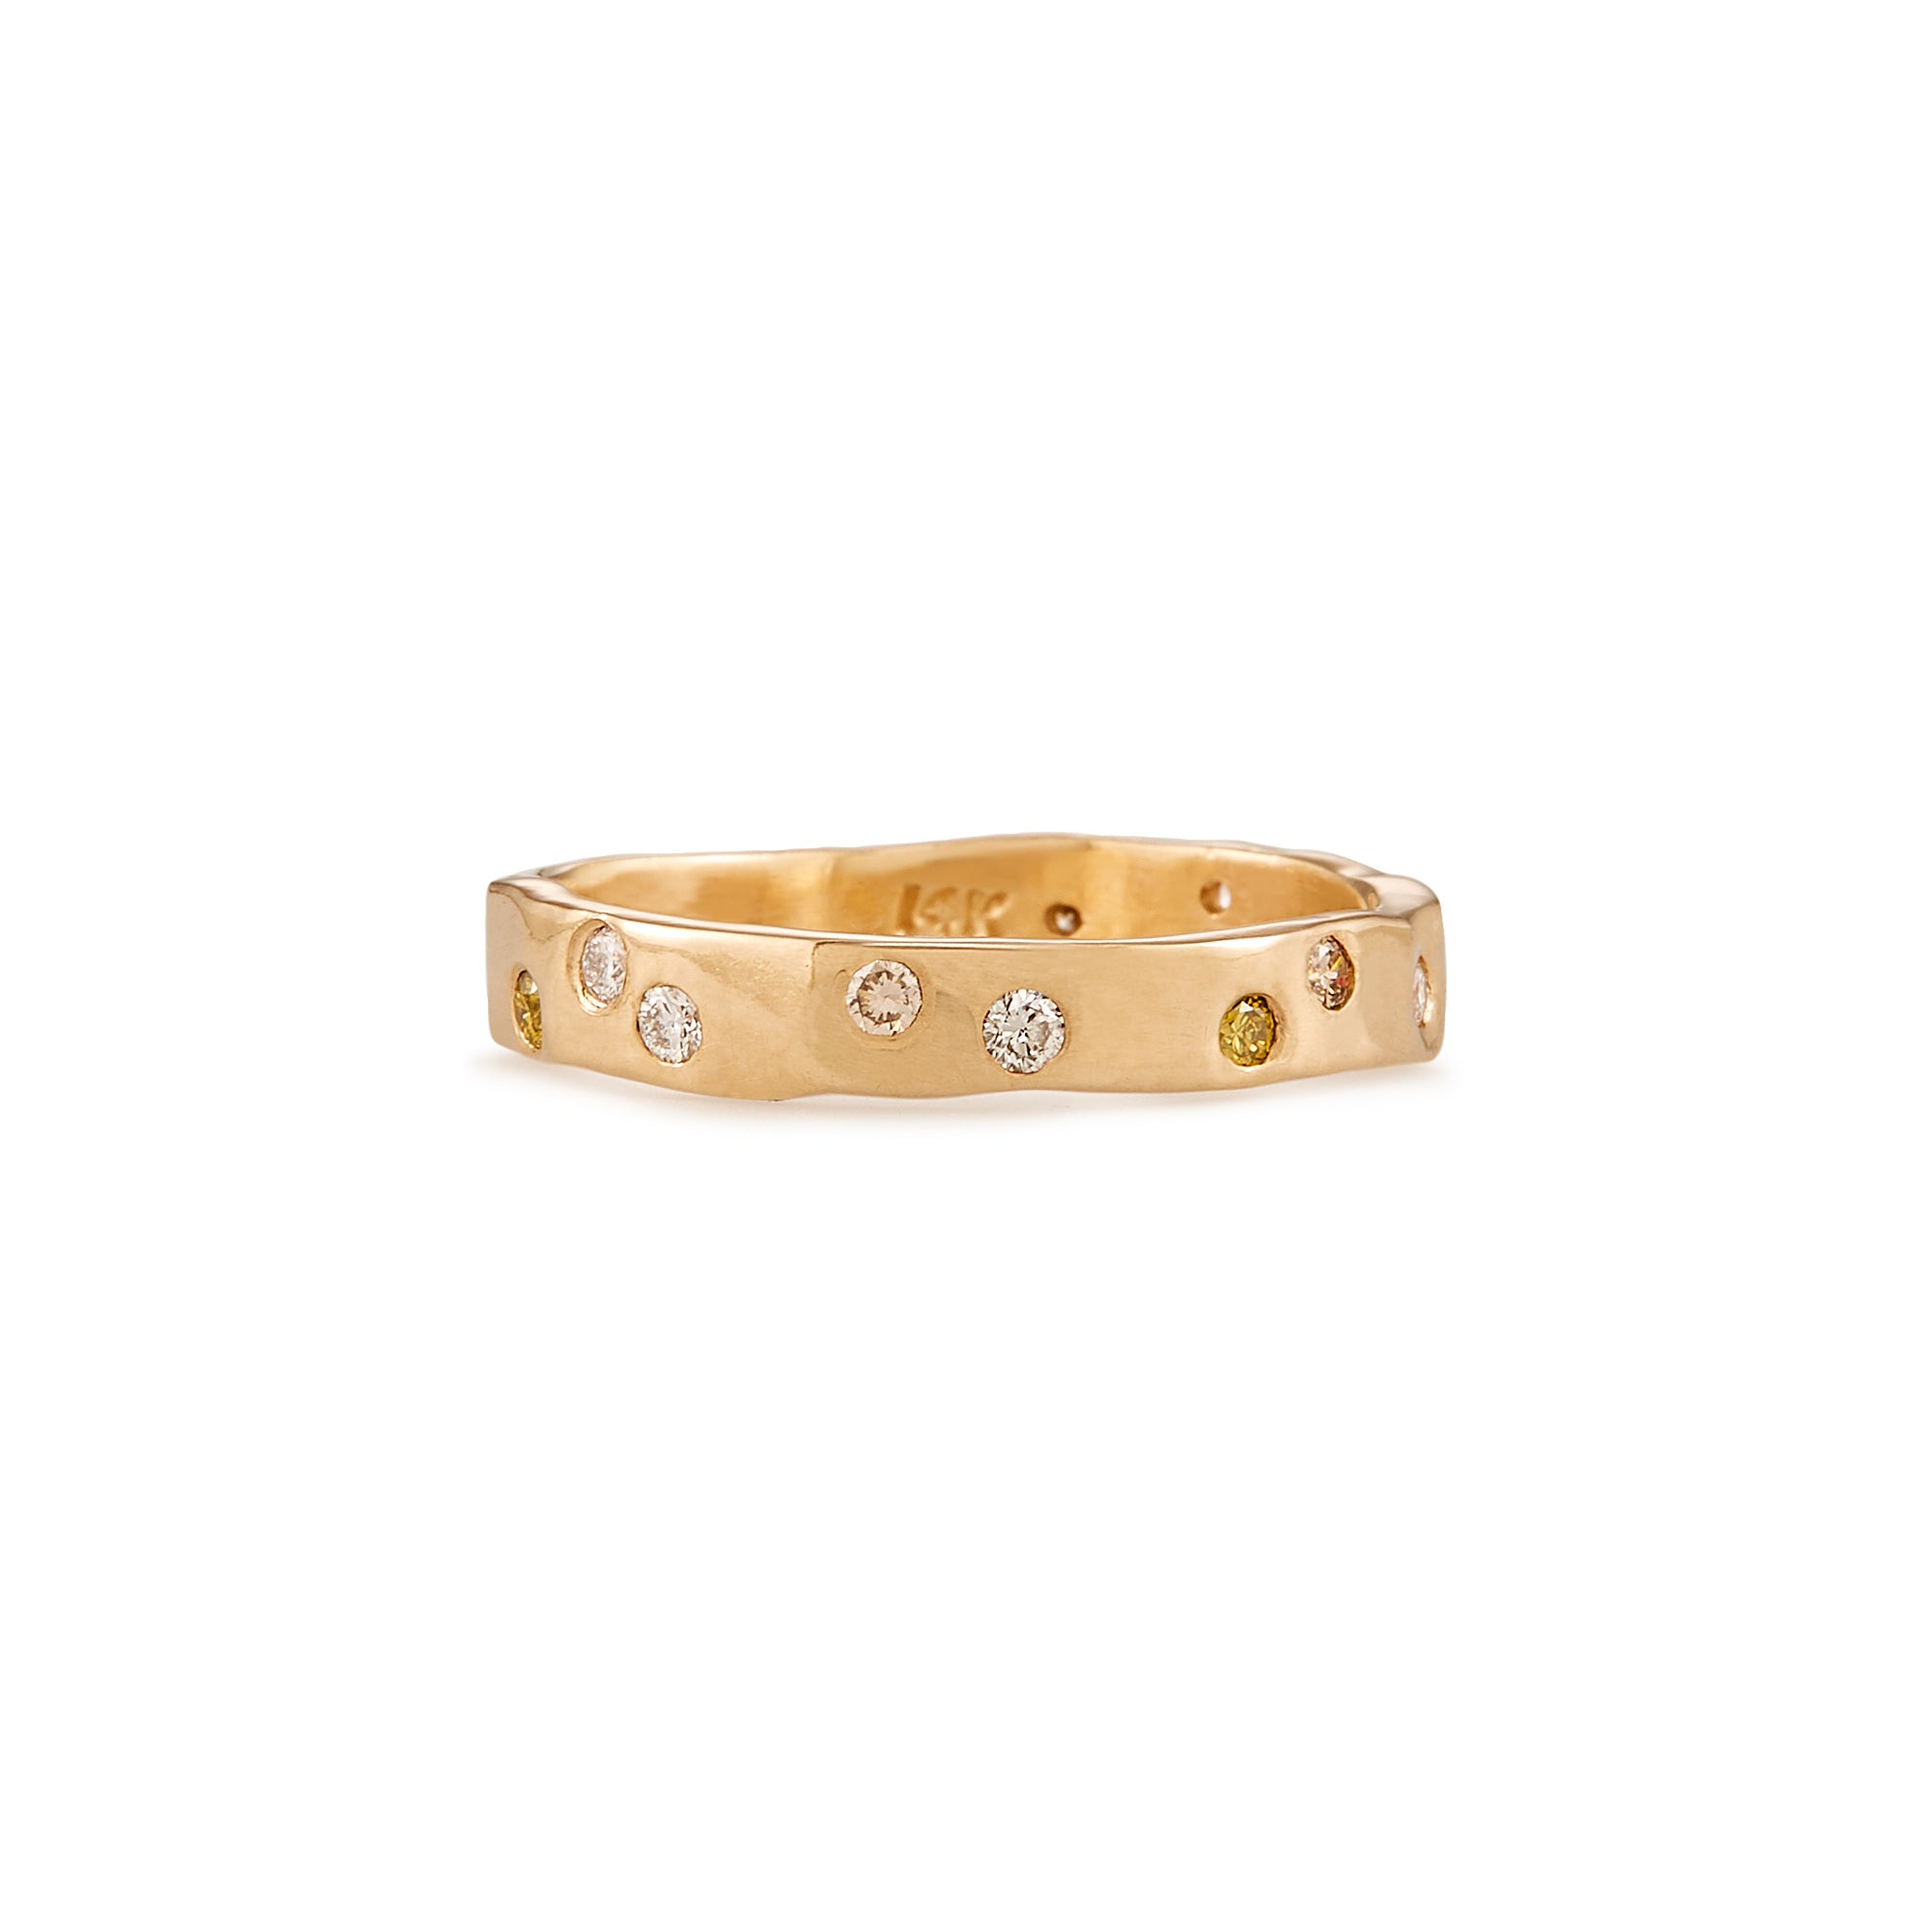 This ONE-OF-A-KIND constellation eternity band features yellow, champagne and white diamonds scattered across the entire ring